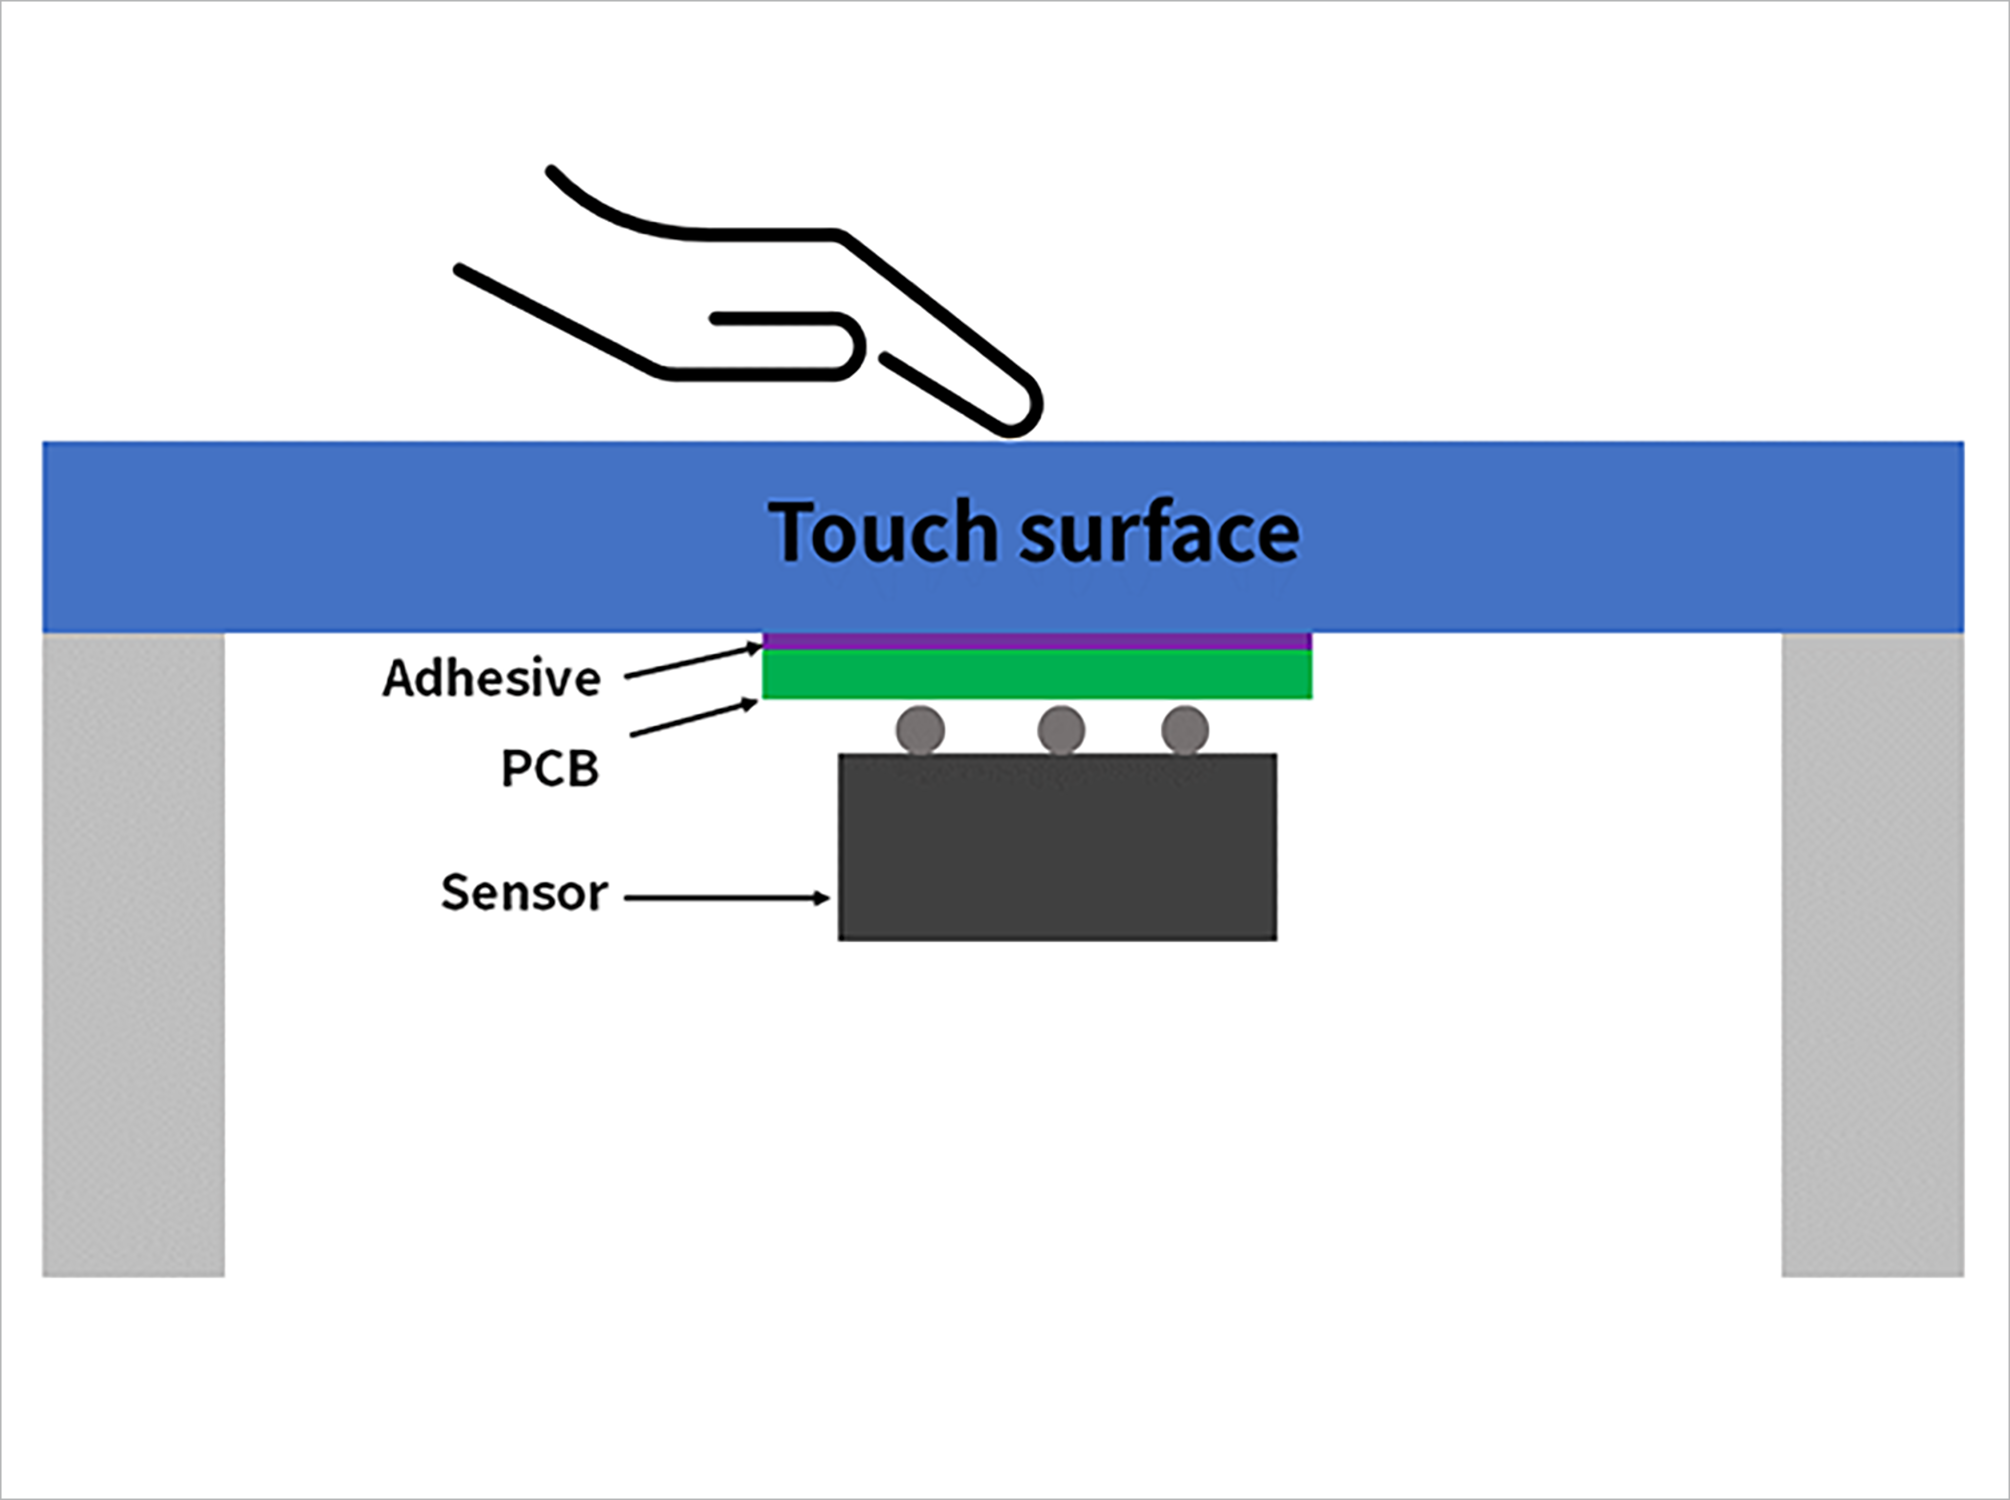 Mounting method 3: Board and sensor configuration directly below the touch surface